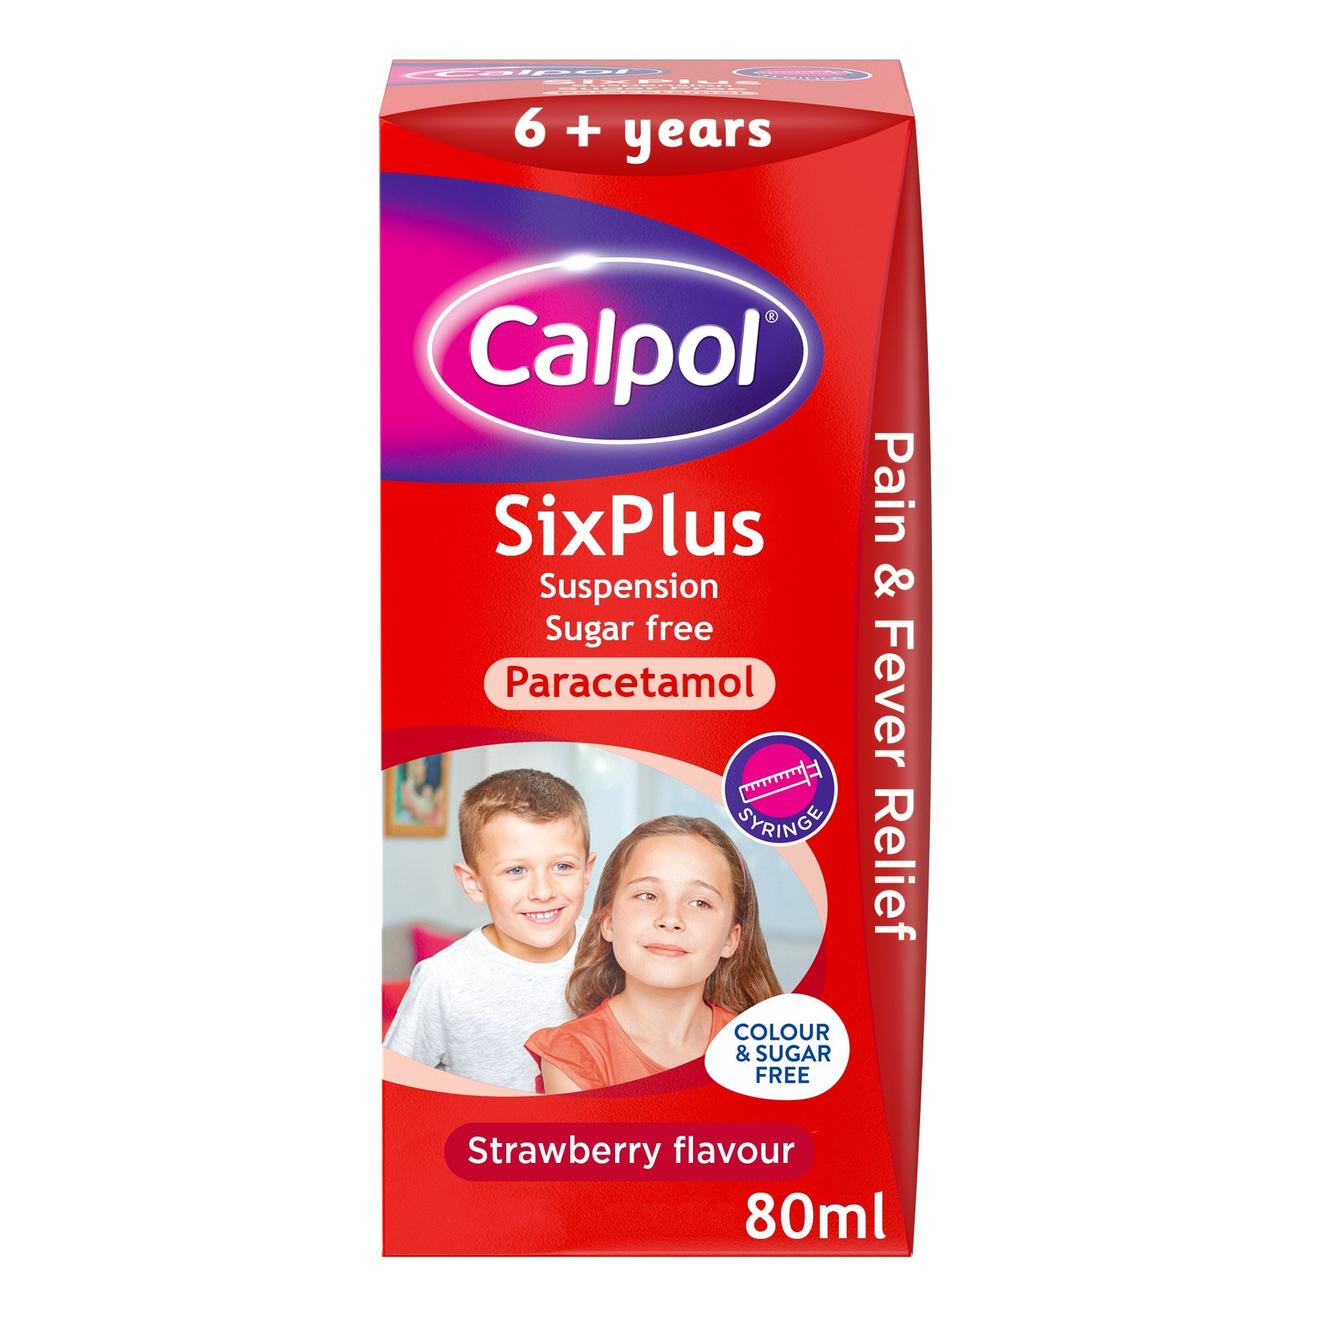 Calpol SixPlus suspension sugar free strawberry flavour 6+ years offers at £449 in Lloyds Pharmacy